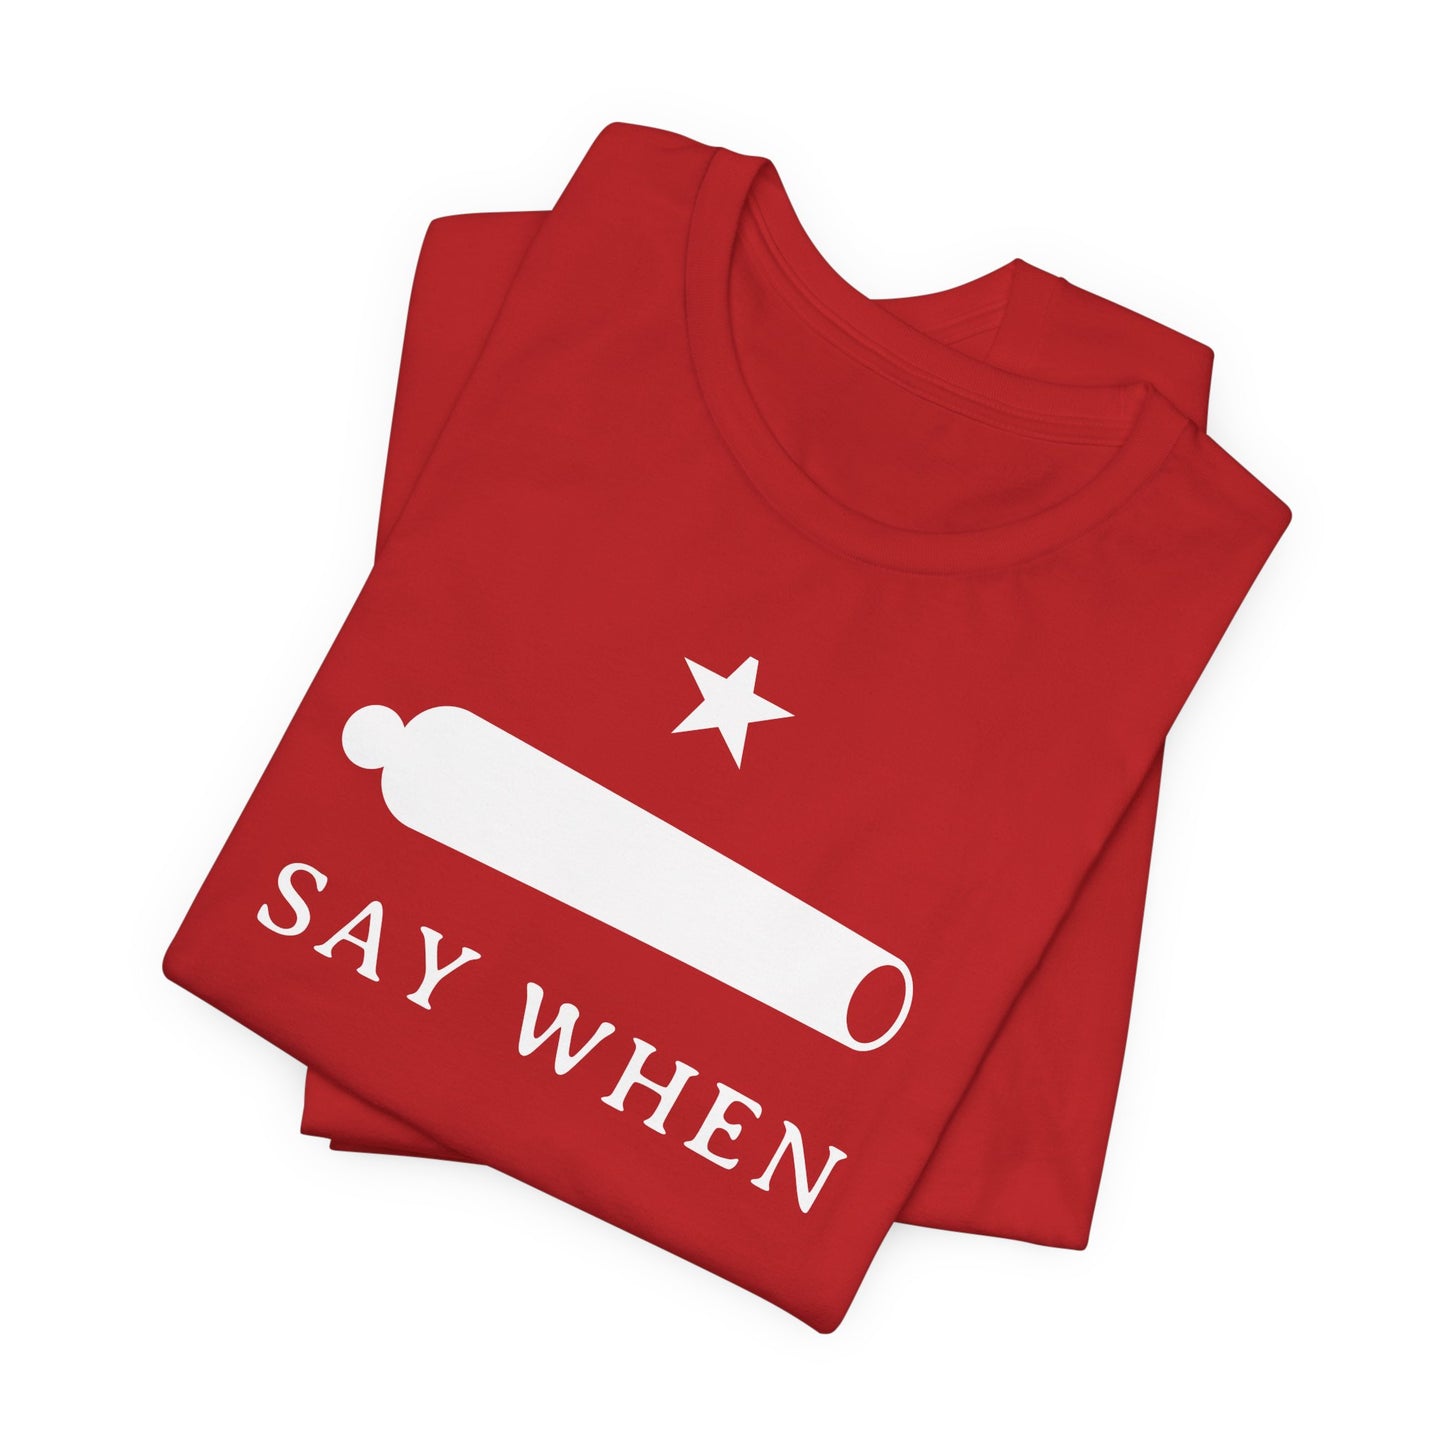 Say When